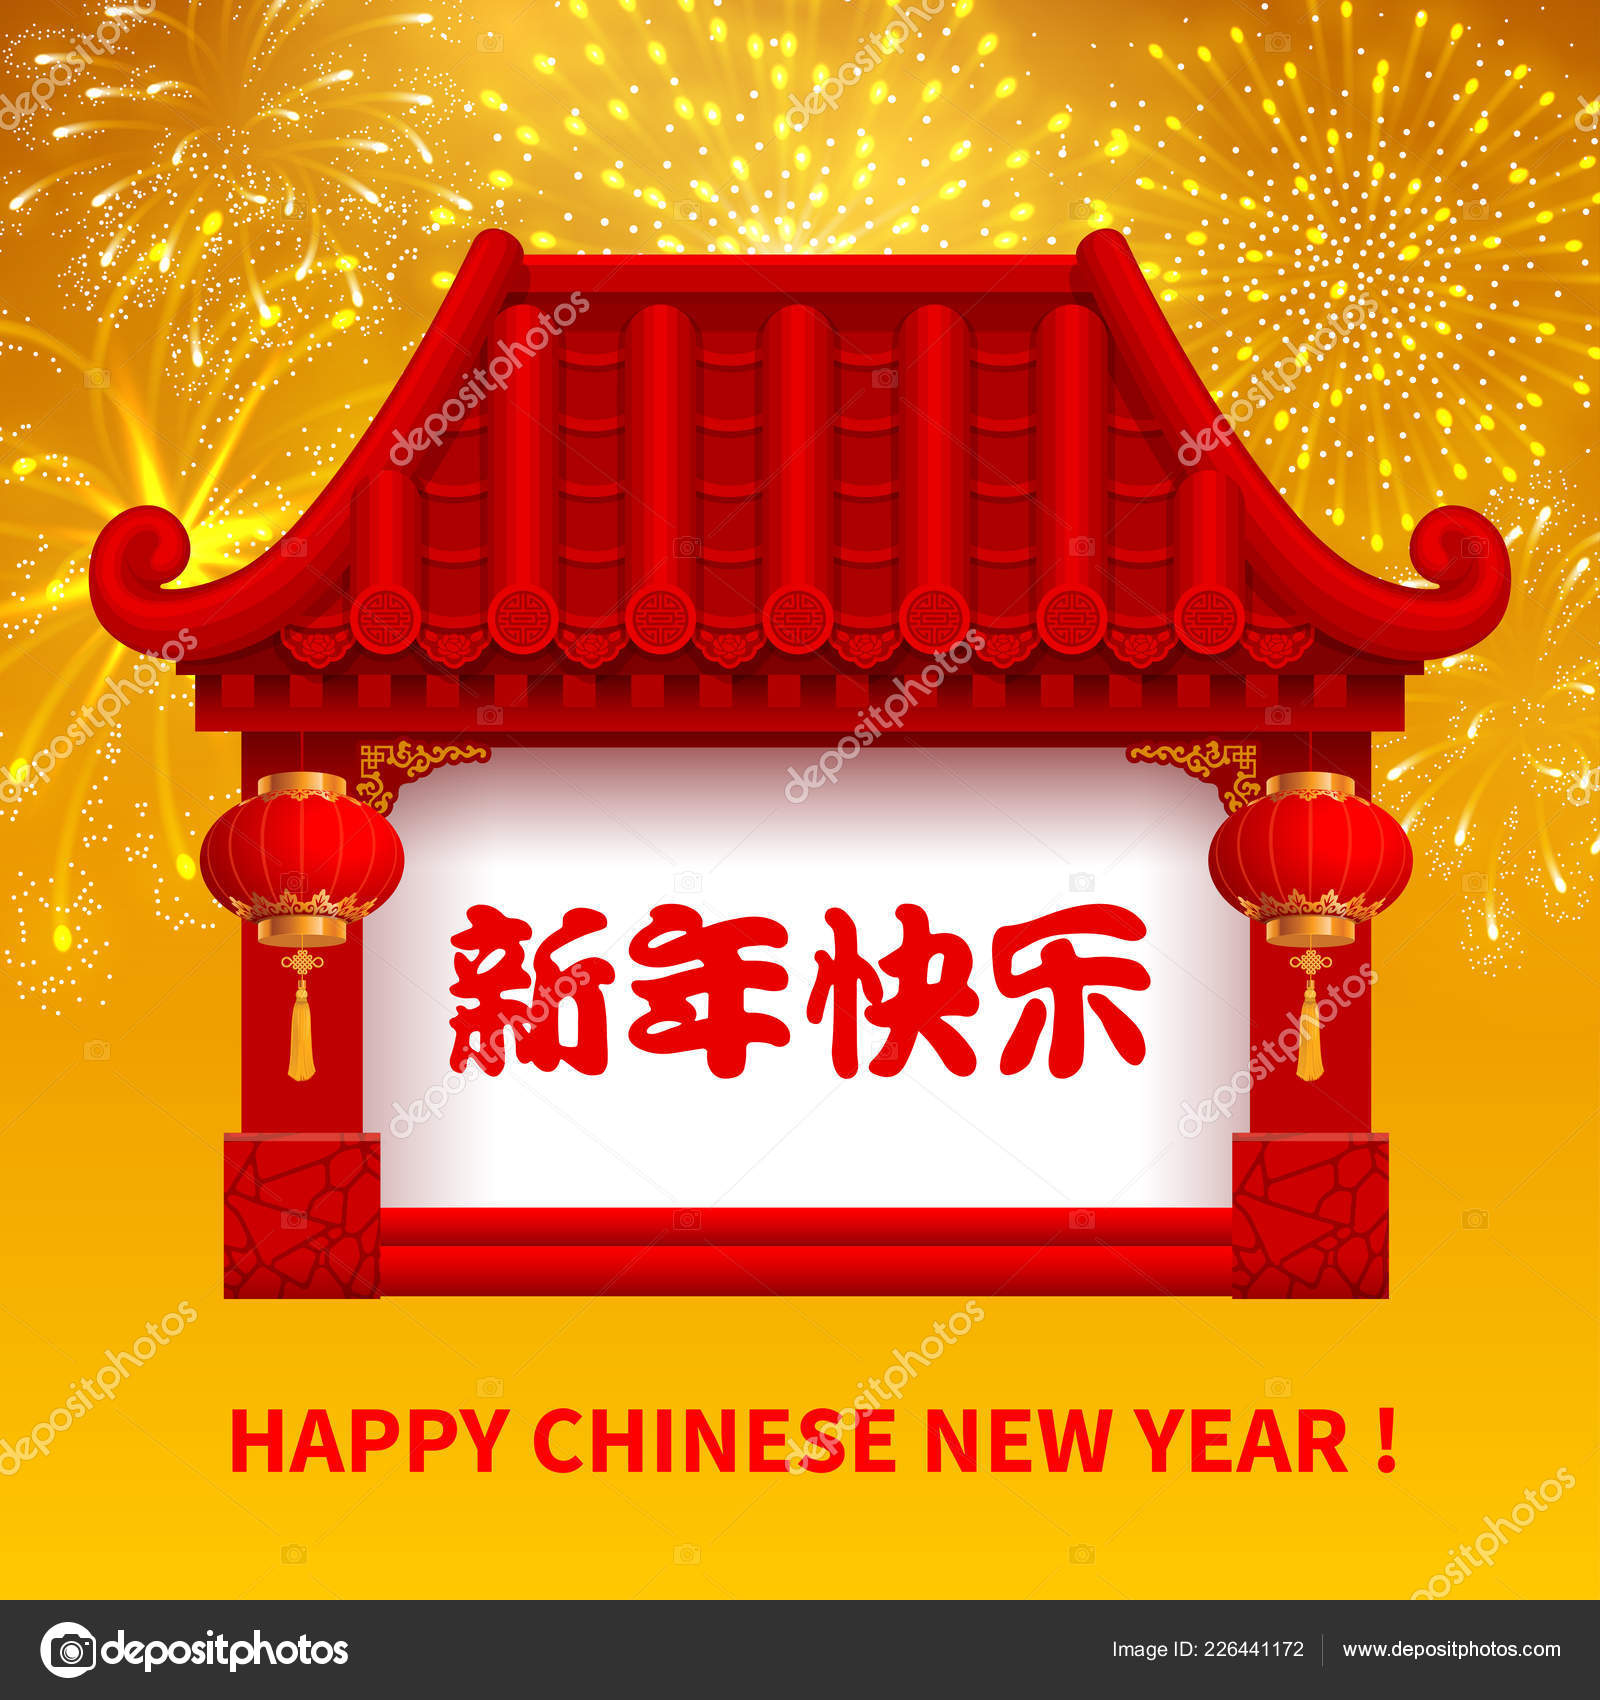 Vector 3d Fire Cracker Of Chinese New Year. Translation: The